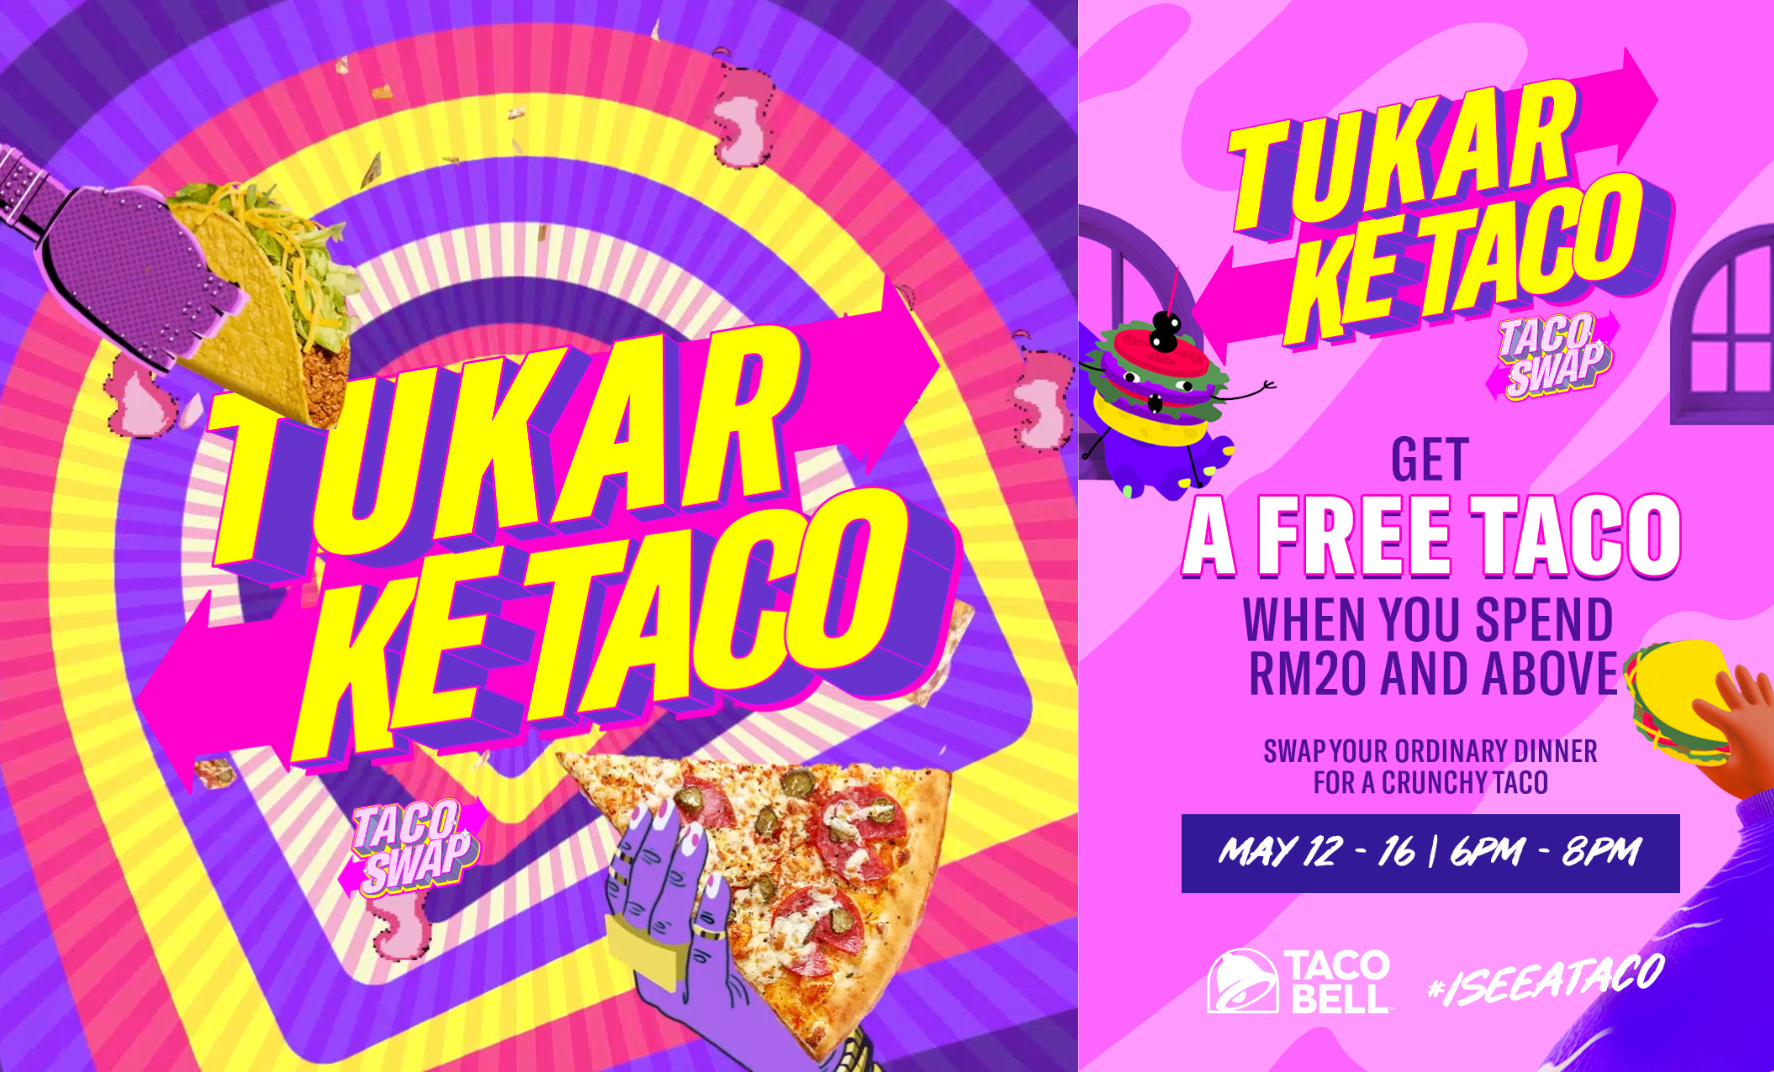 Drop by any Taco Bell outlets between 12 and 16 May at 6PM- 8PM to satisfy your Taco craves!